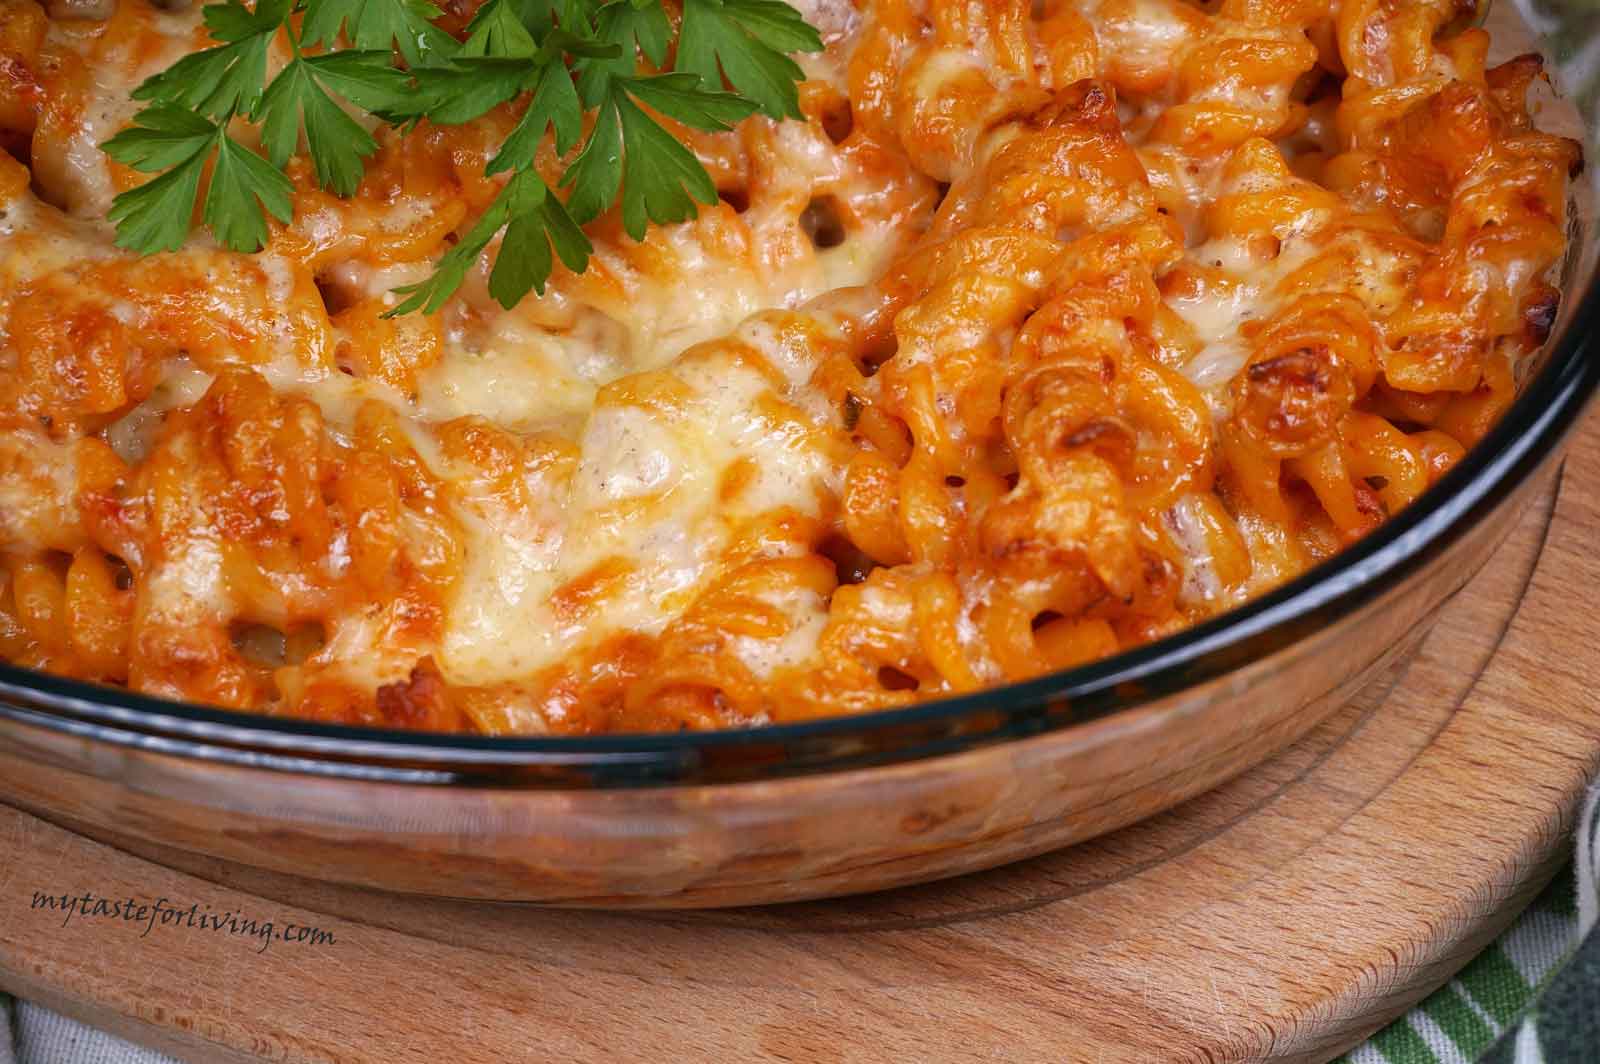 Easy cheese and tomato pasta bake when you want something tasty, delicious and appetizingy to eat but can’t have a lot of time in the kitchen.